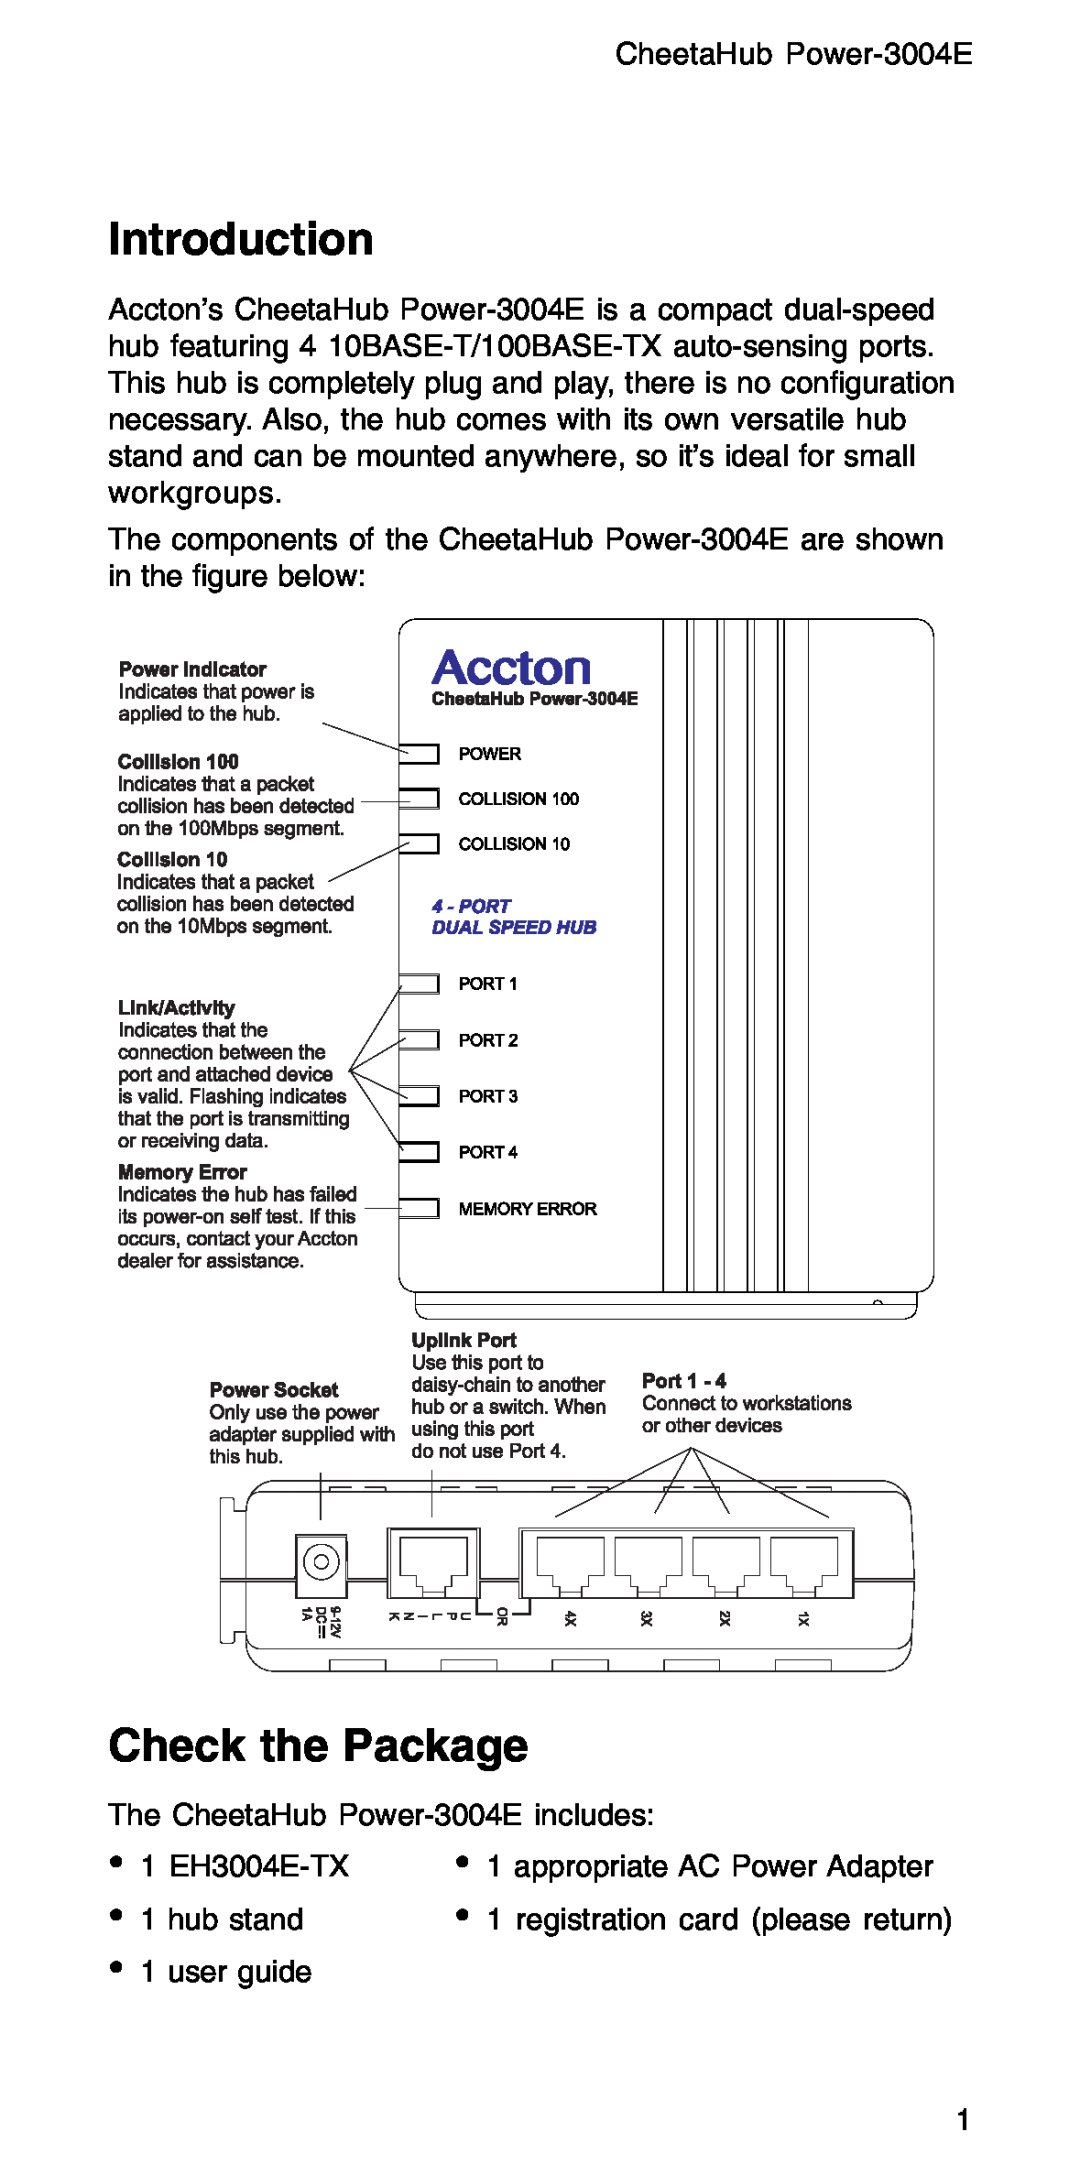 Accton Technology POWER-3004E manual Introduction, Check the Package 